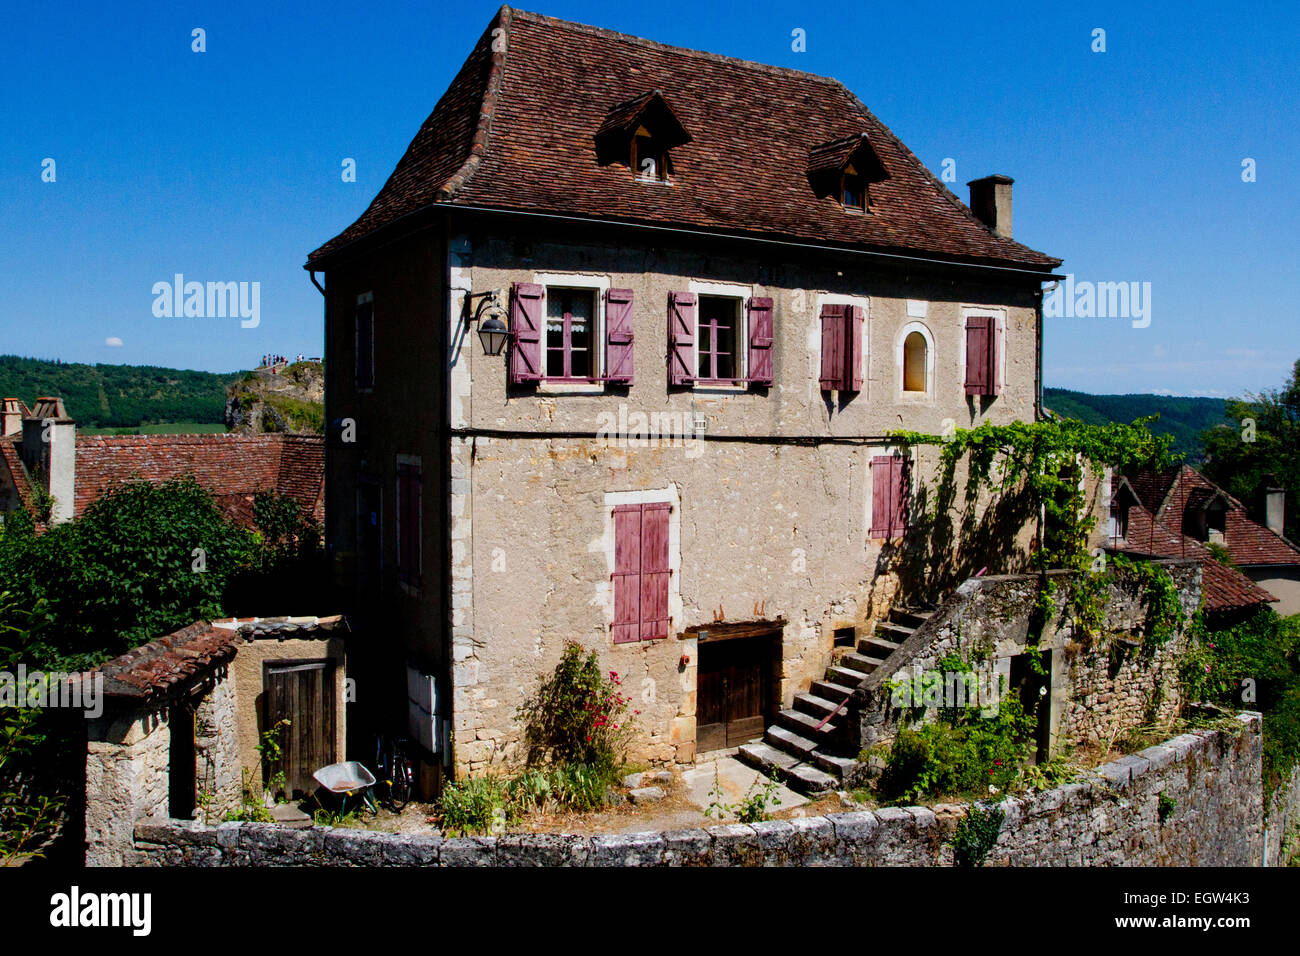 Houses of  medieval architecture in Saint-Cirq-Lapopie, a commune in the Lot department in south-western France in August Stock Photo